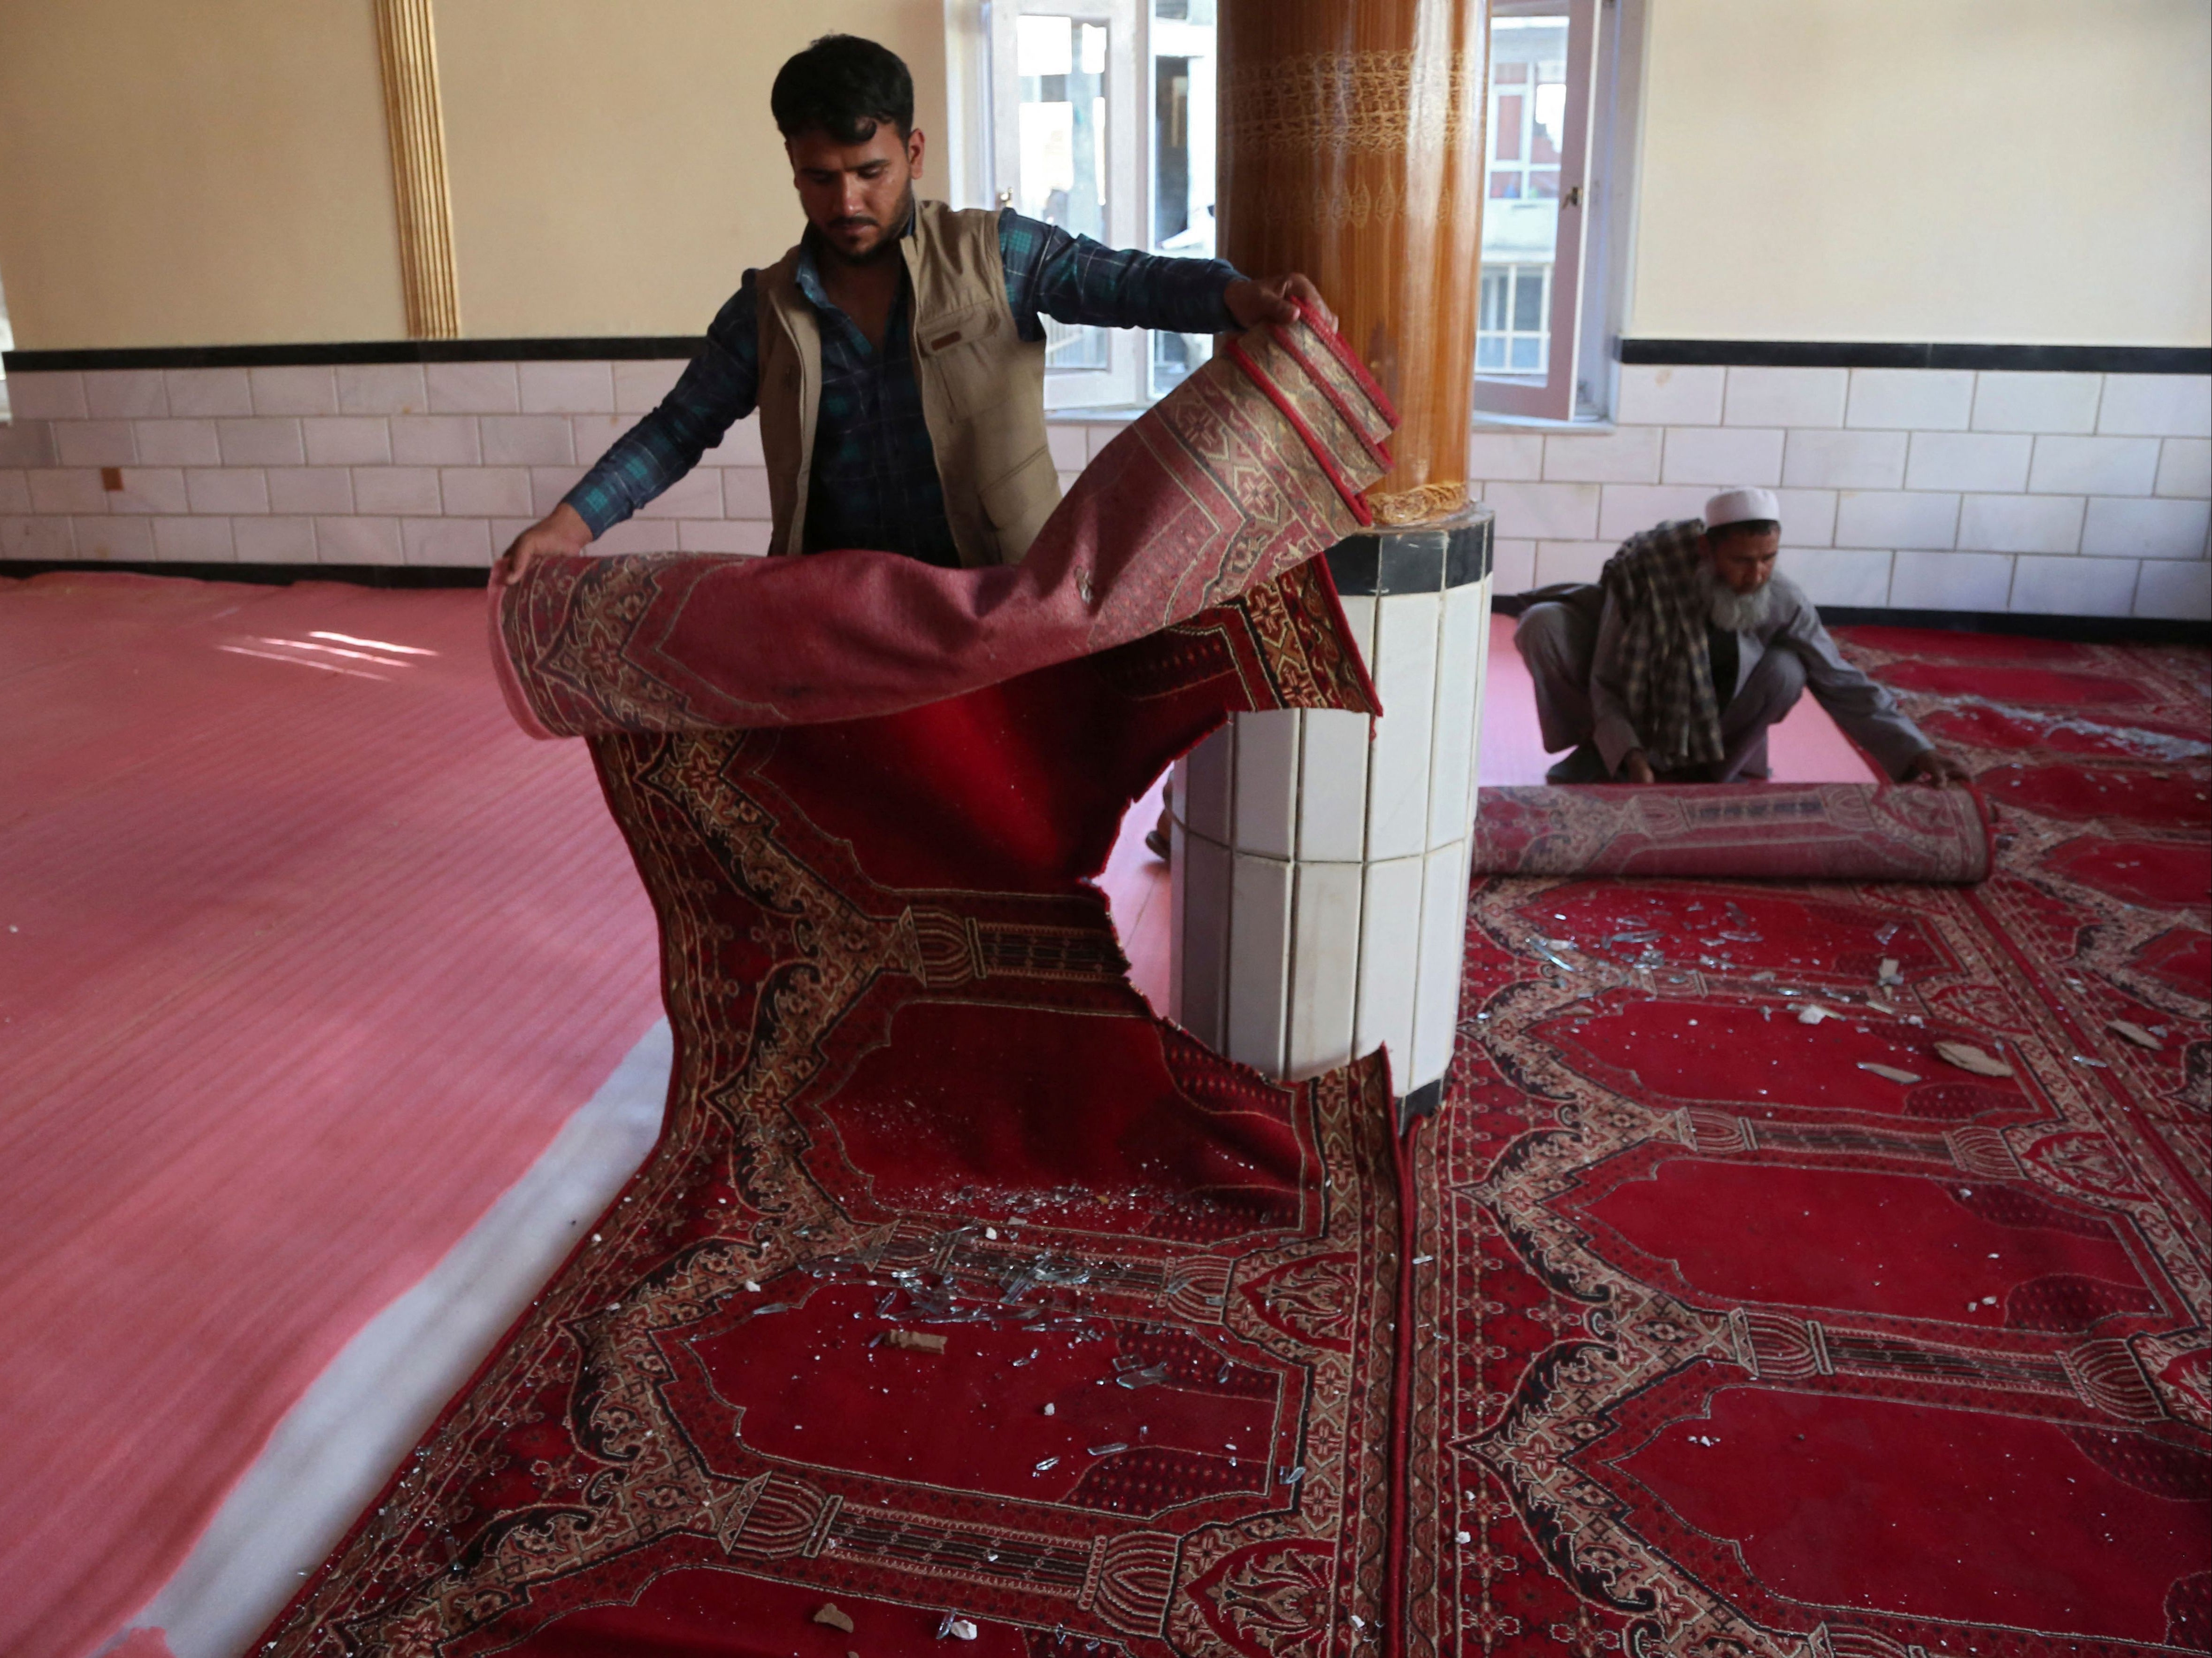 Devotees remove carpets from a mosque after a bomb blast on the outskirts of Kabul on Friday, which killed at least 12 people